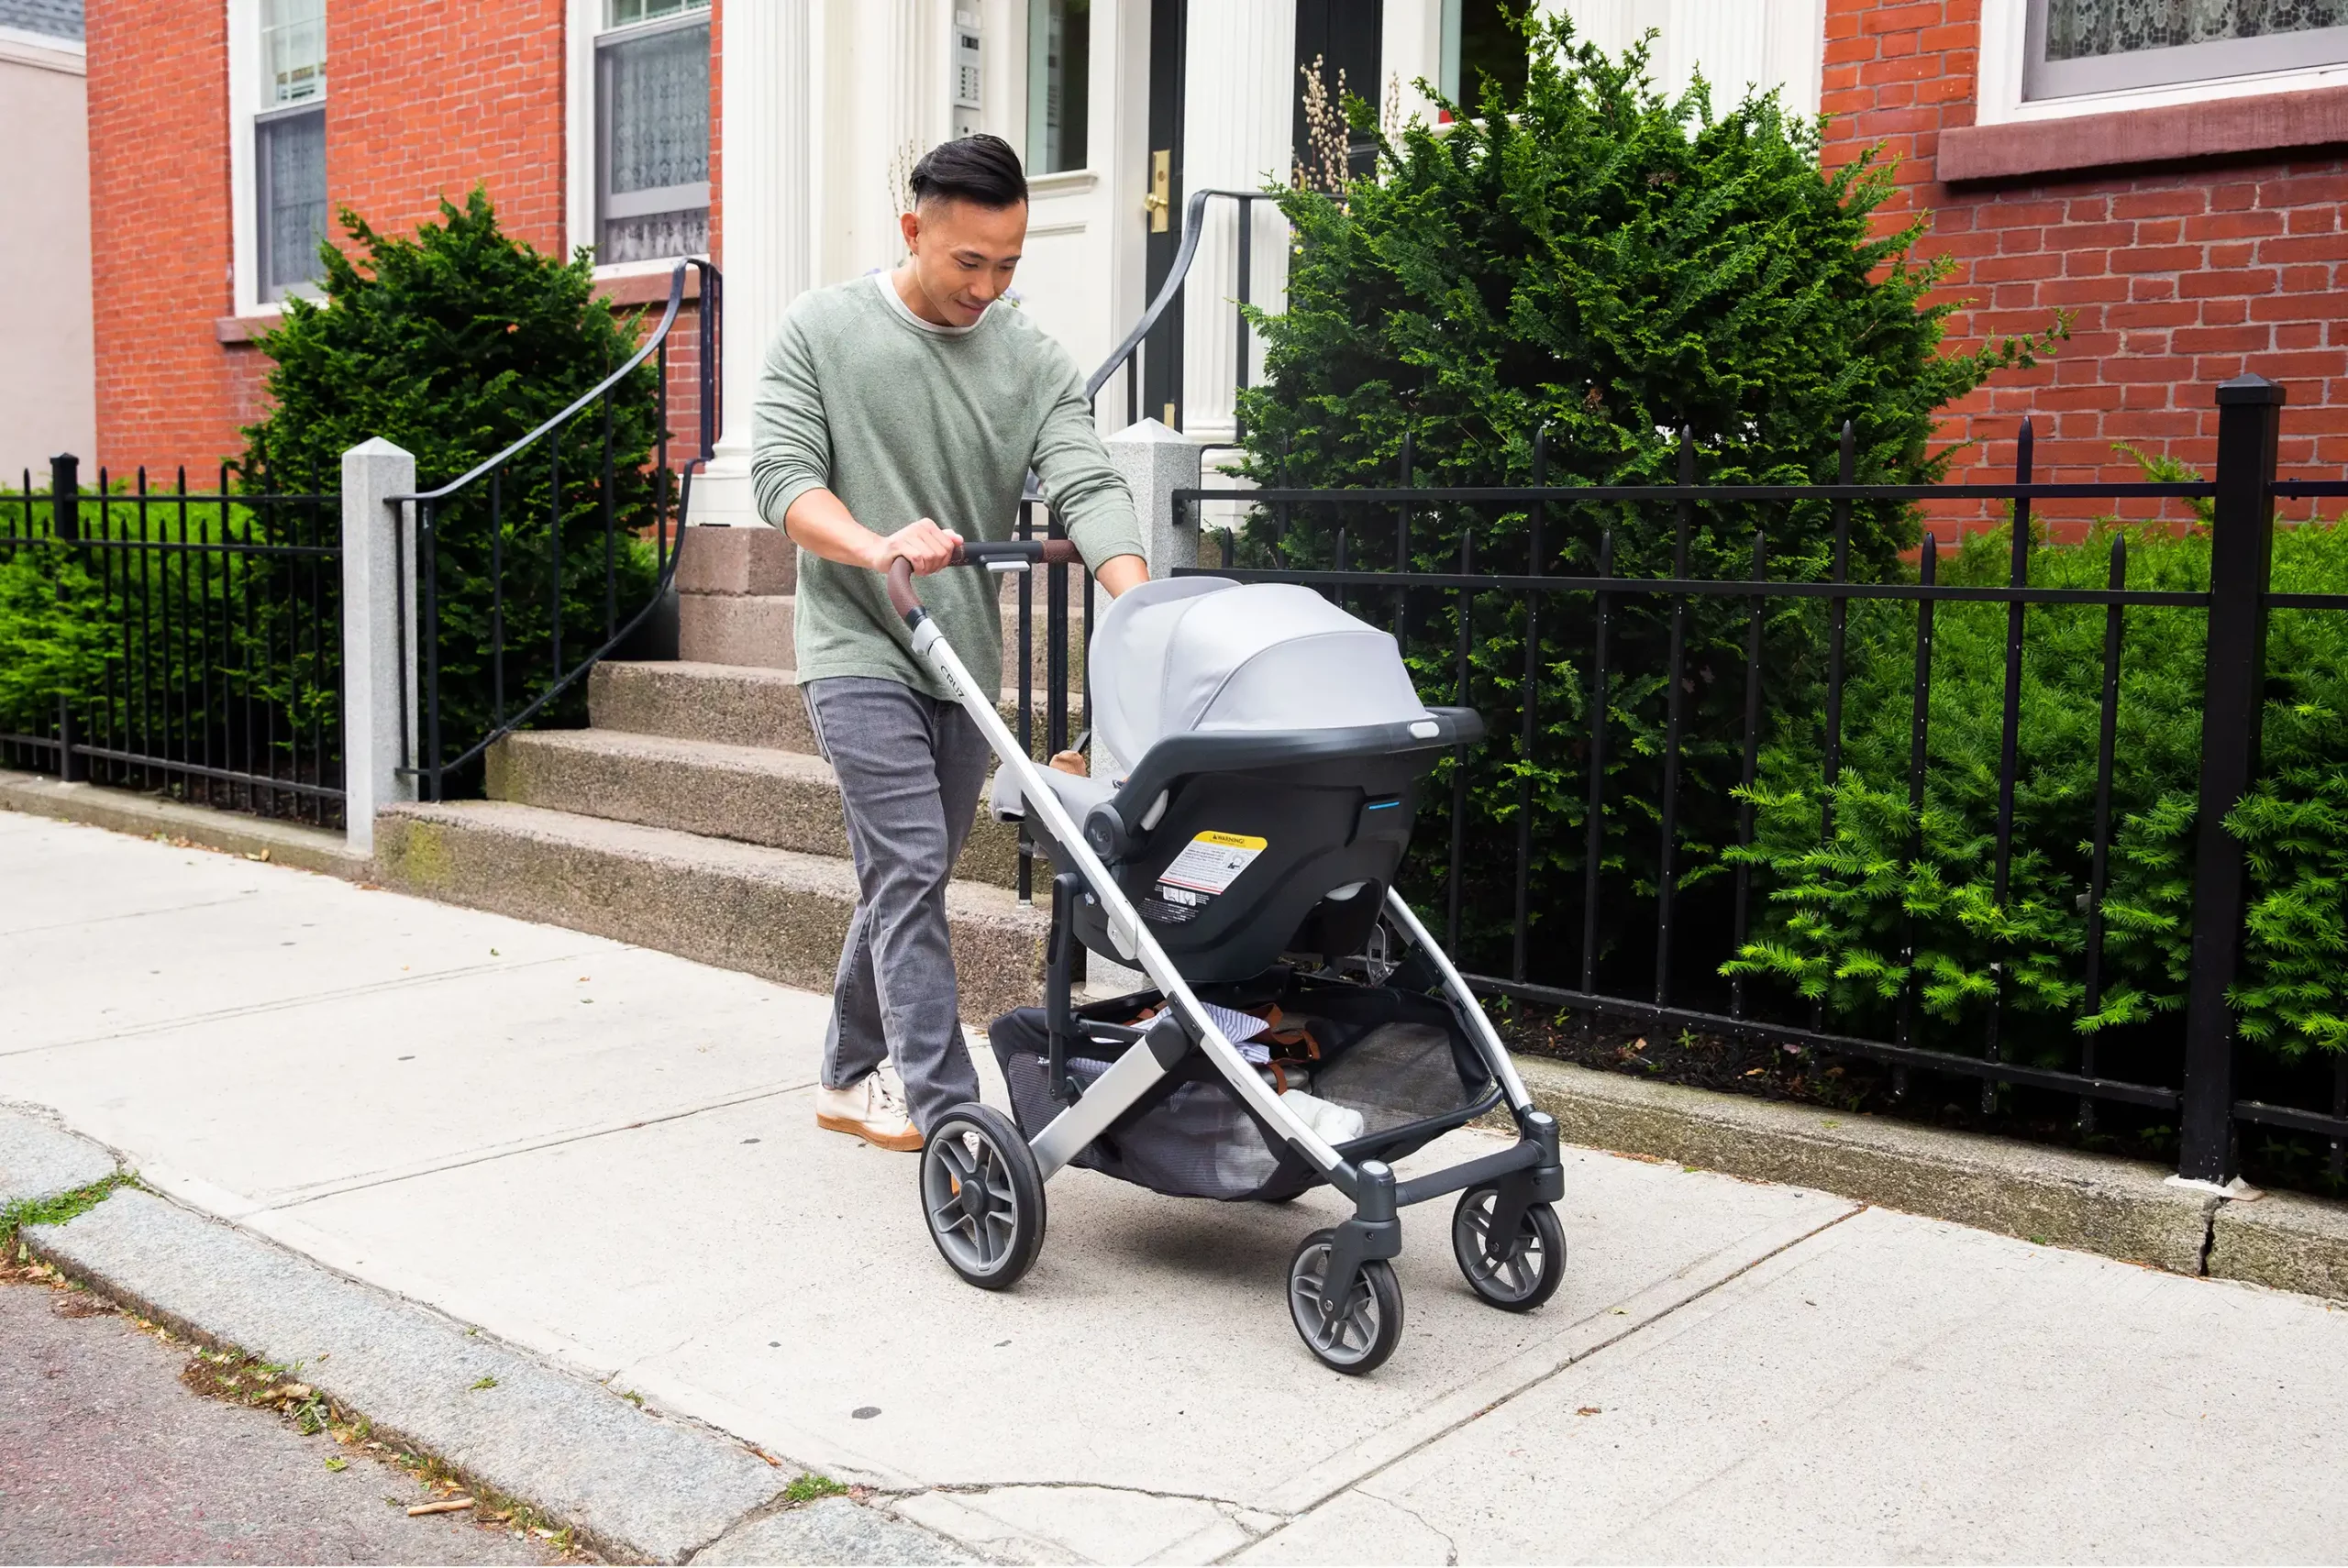 A caring man tends to his child in the Mesa V2 carrier attached directly to the Cruz stroller (no adapters needed), easily allowing him to go from drive to stroll